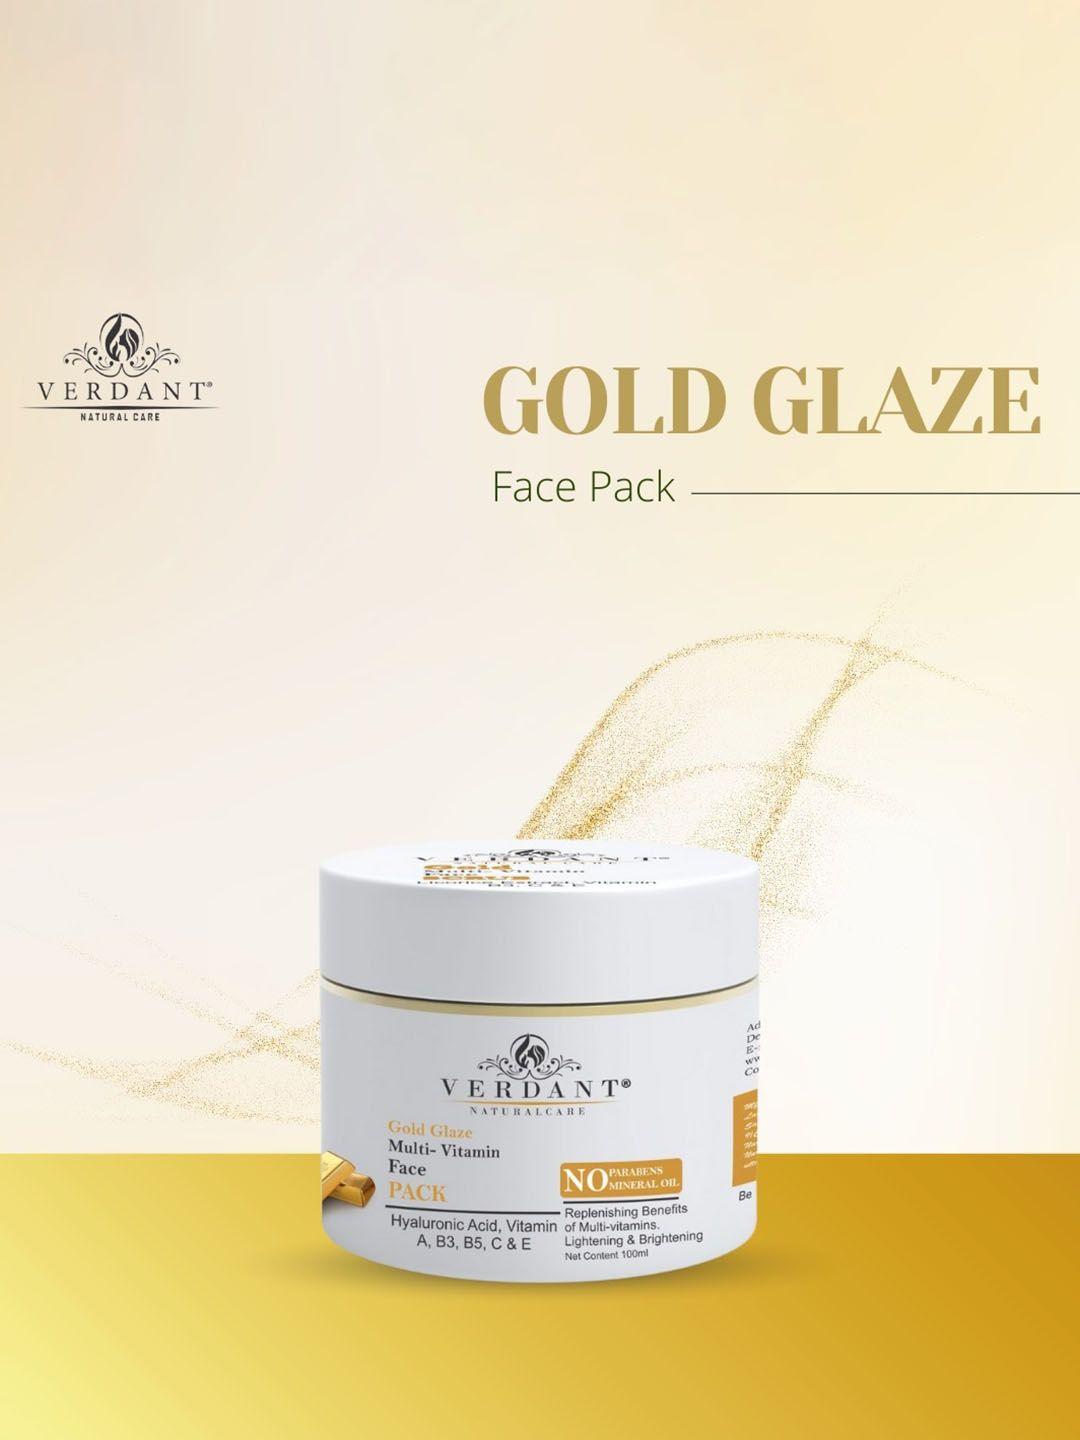 verdant natural care gold glaze multi-vitamin face pack with hyaluronic acid - 100 ml